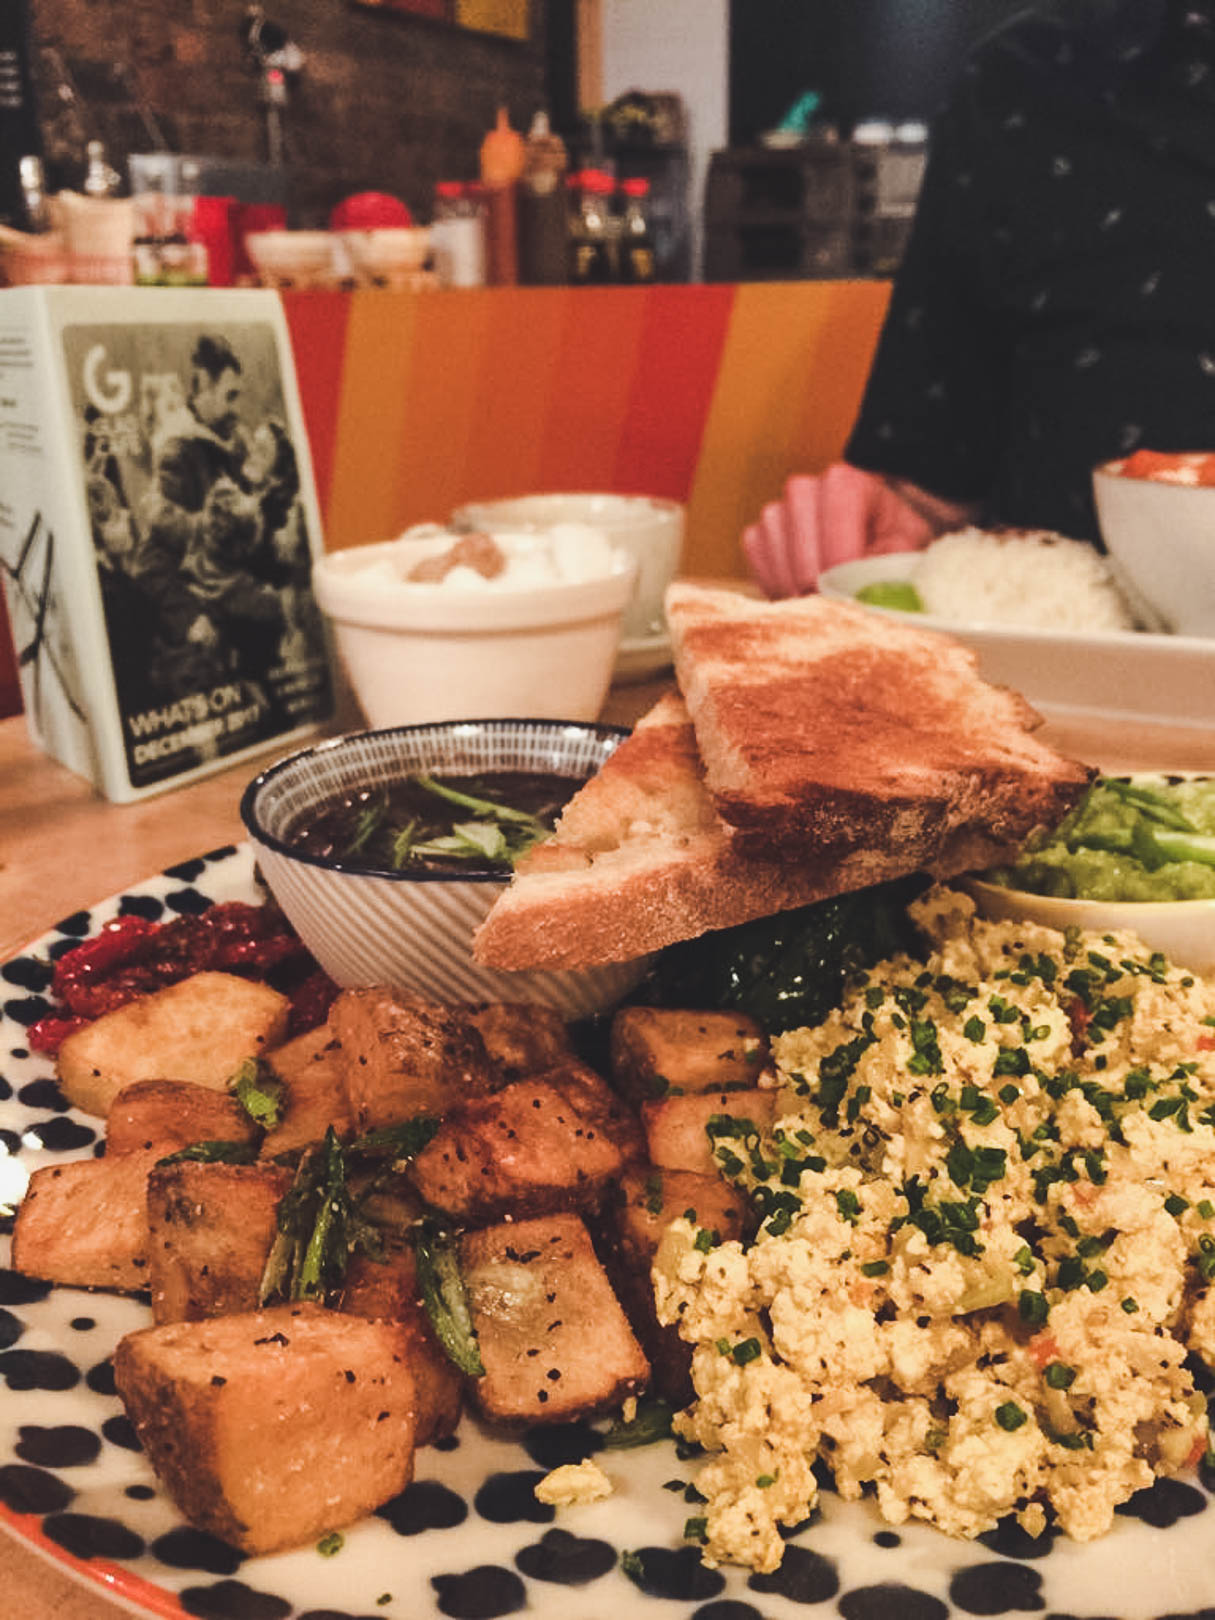 The Glad Cafe, Glasgow is a fully licensed cafe and venue in the Southside, offering a range of vegan dishes for breakfast, lunch and dinner. In the evenings the cafe turns into a popular bar which offers craft beers from Scotland and further afield.